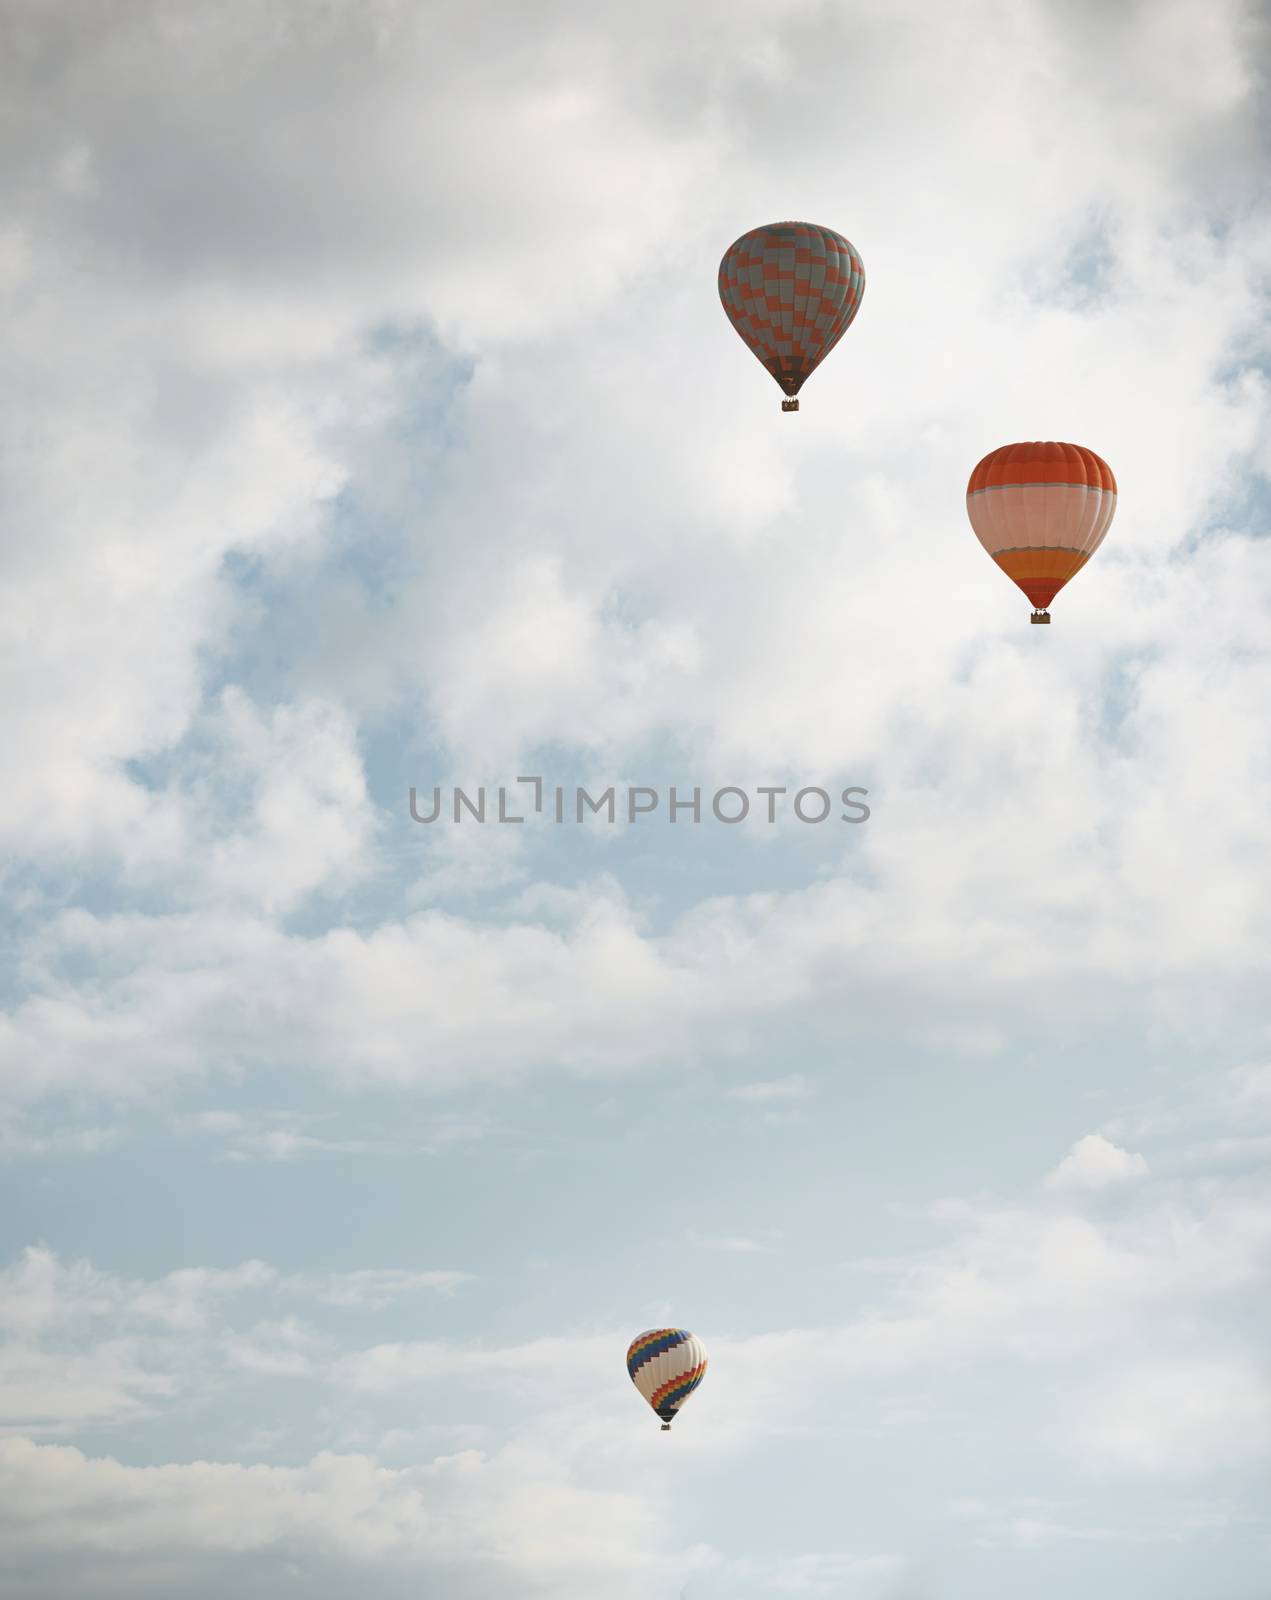 Three hot air balloons flying in the sky